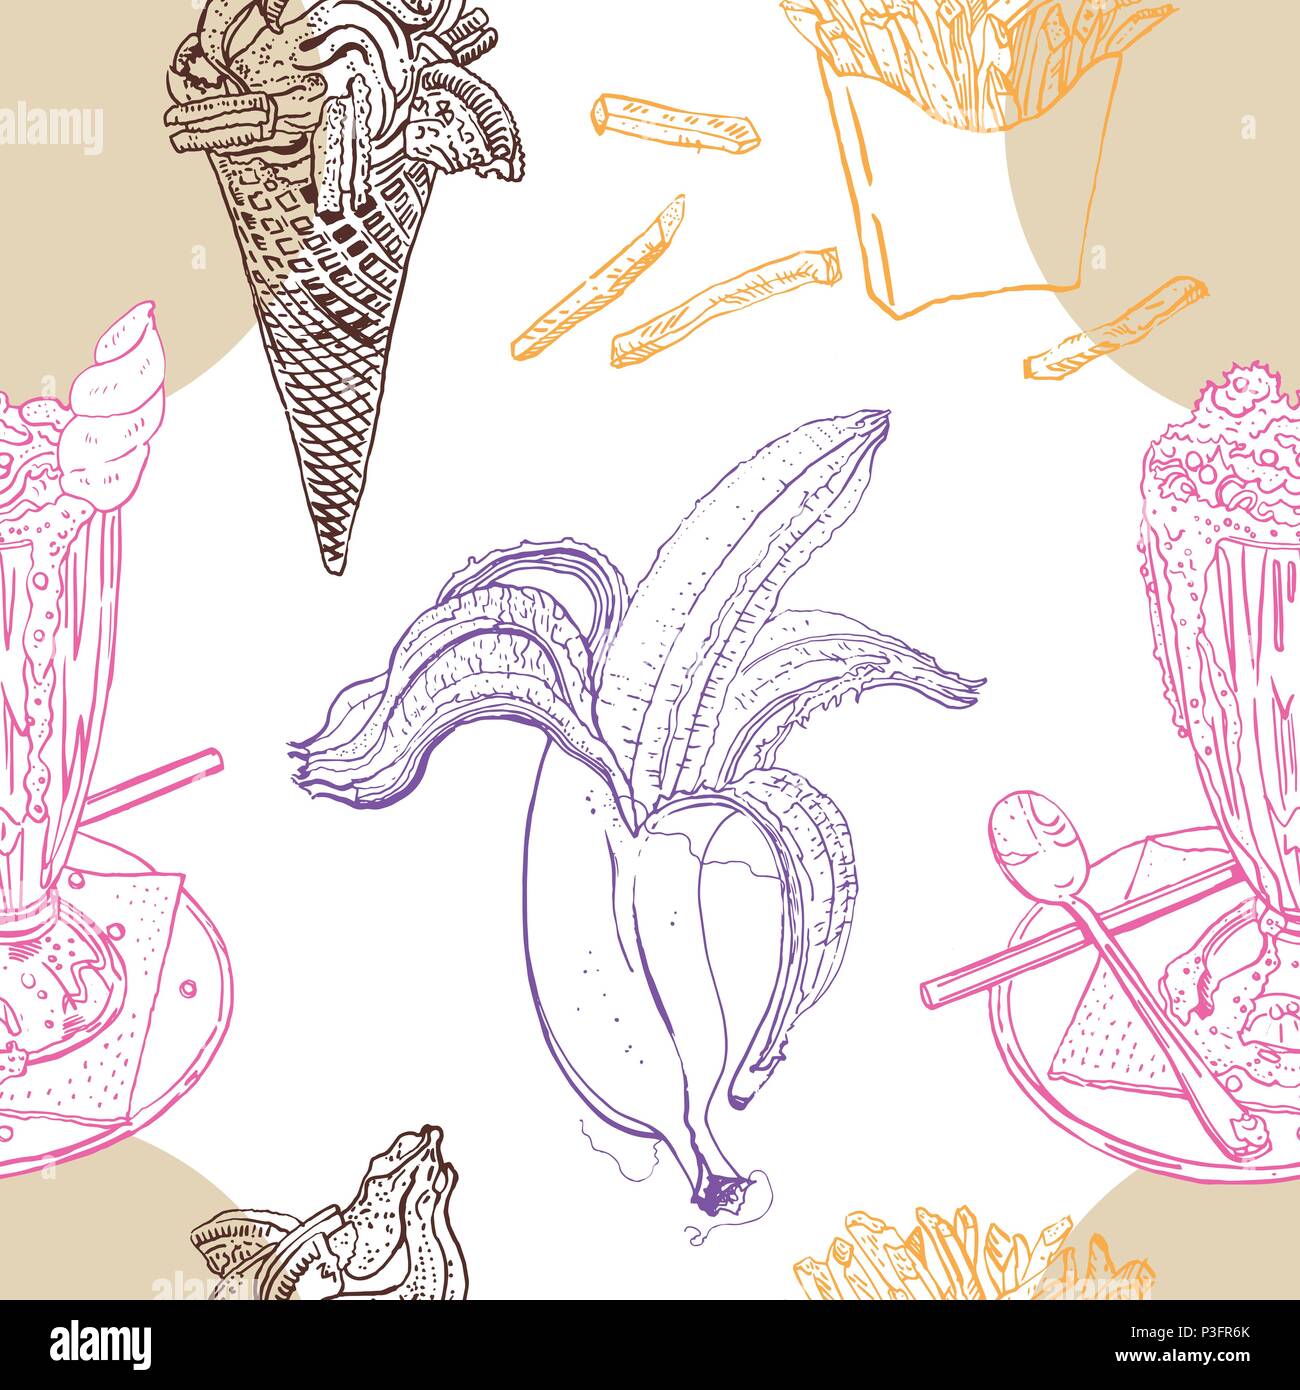 Snacks and desserts retro style seamless pattern: milk shake, ice cream, banana, french fries. Line art, outline, chocolate, pink, orange, beige, purple. Hand drawn sketchy vector illustration. Stock Vector